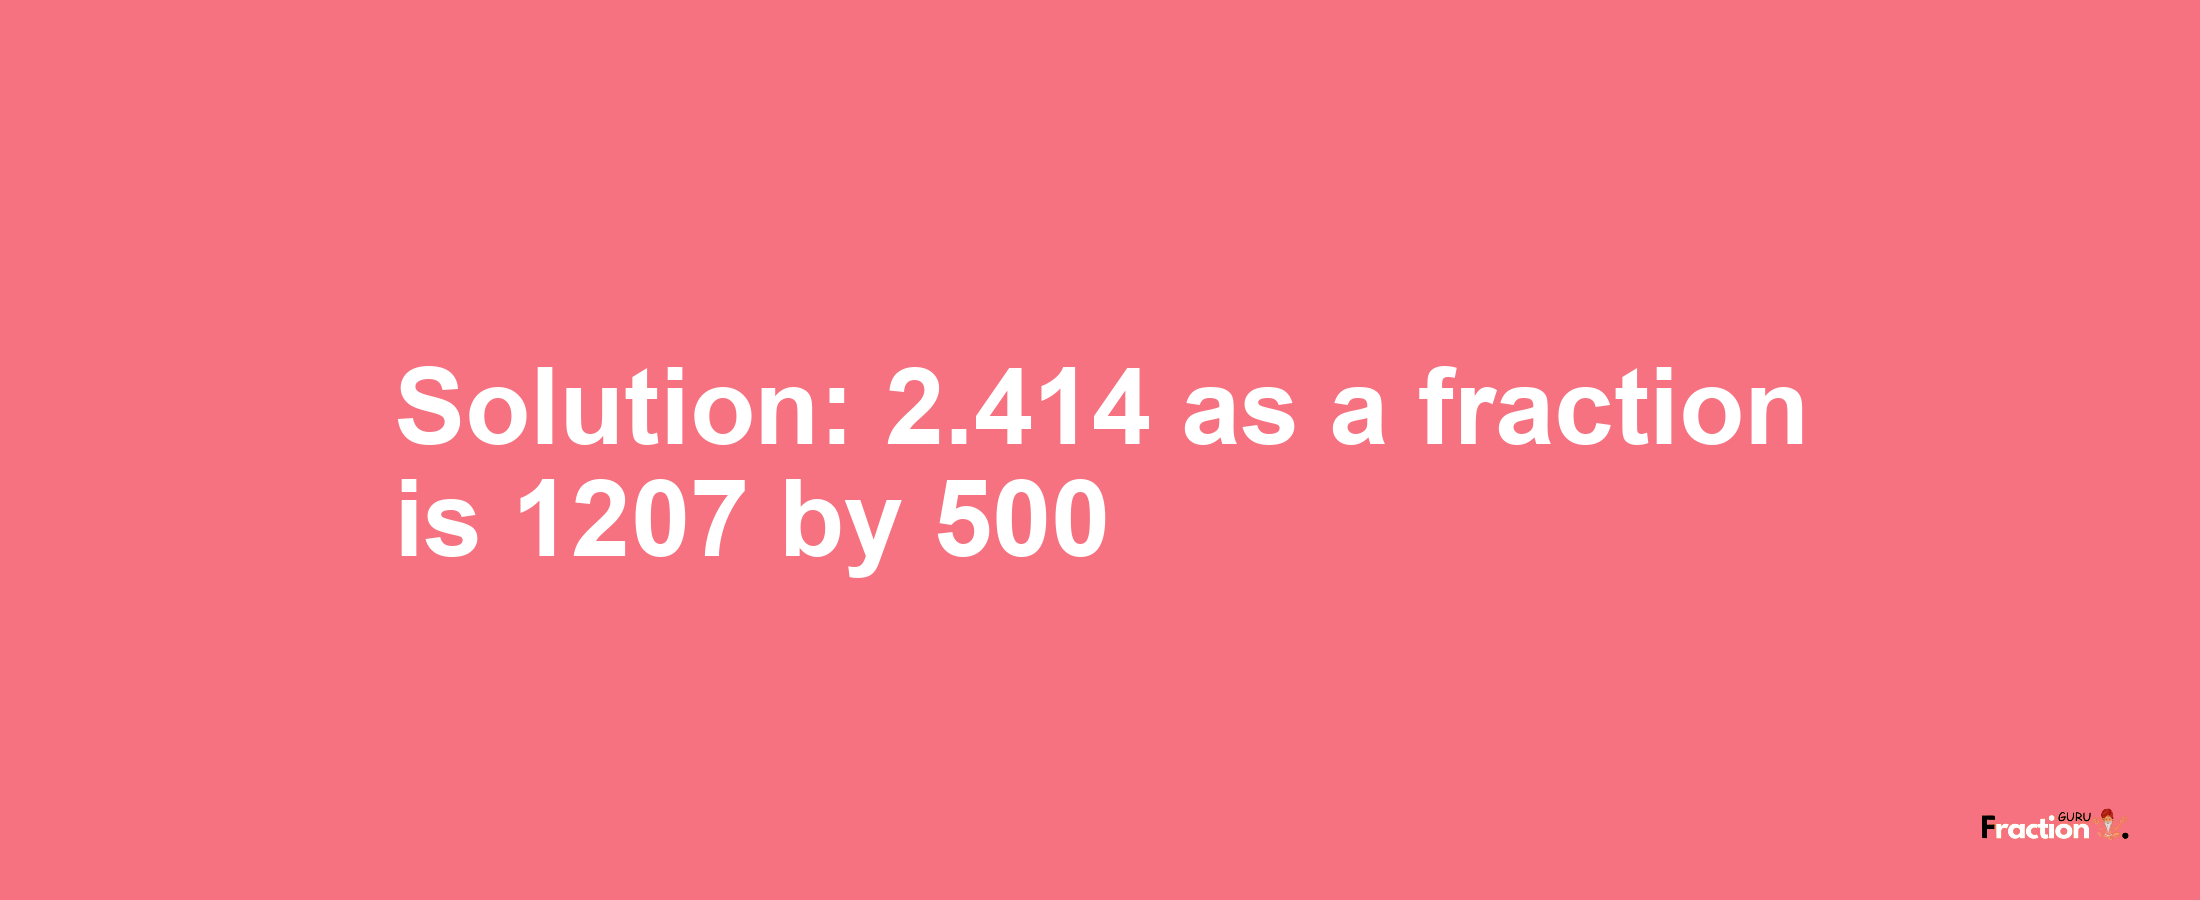 Solution:2.414 as a fraction is 1207/500